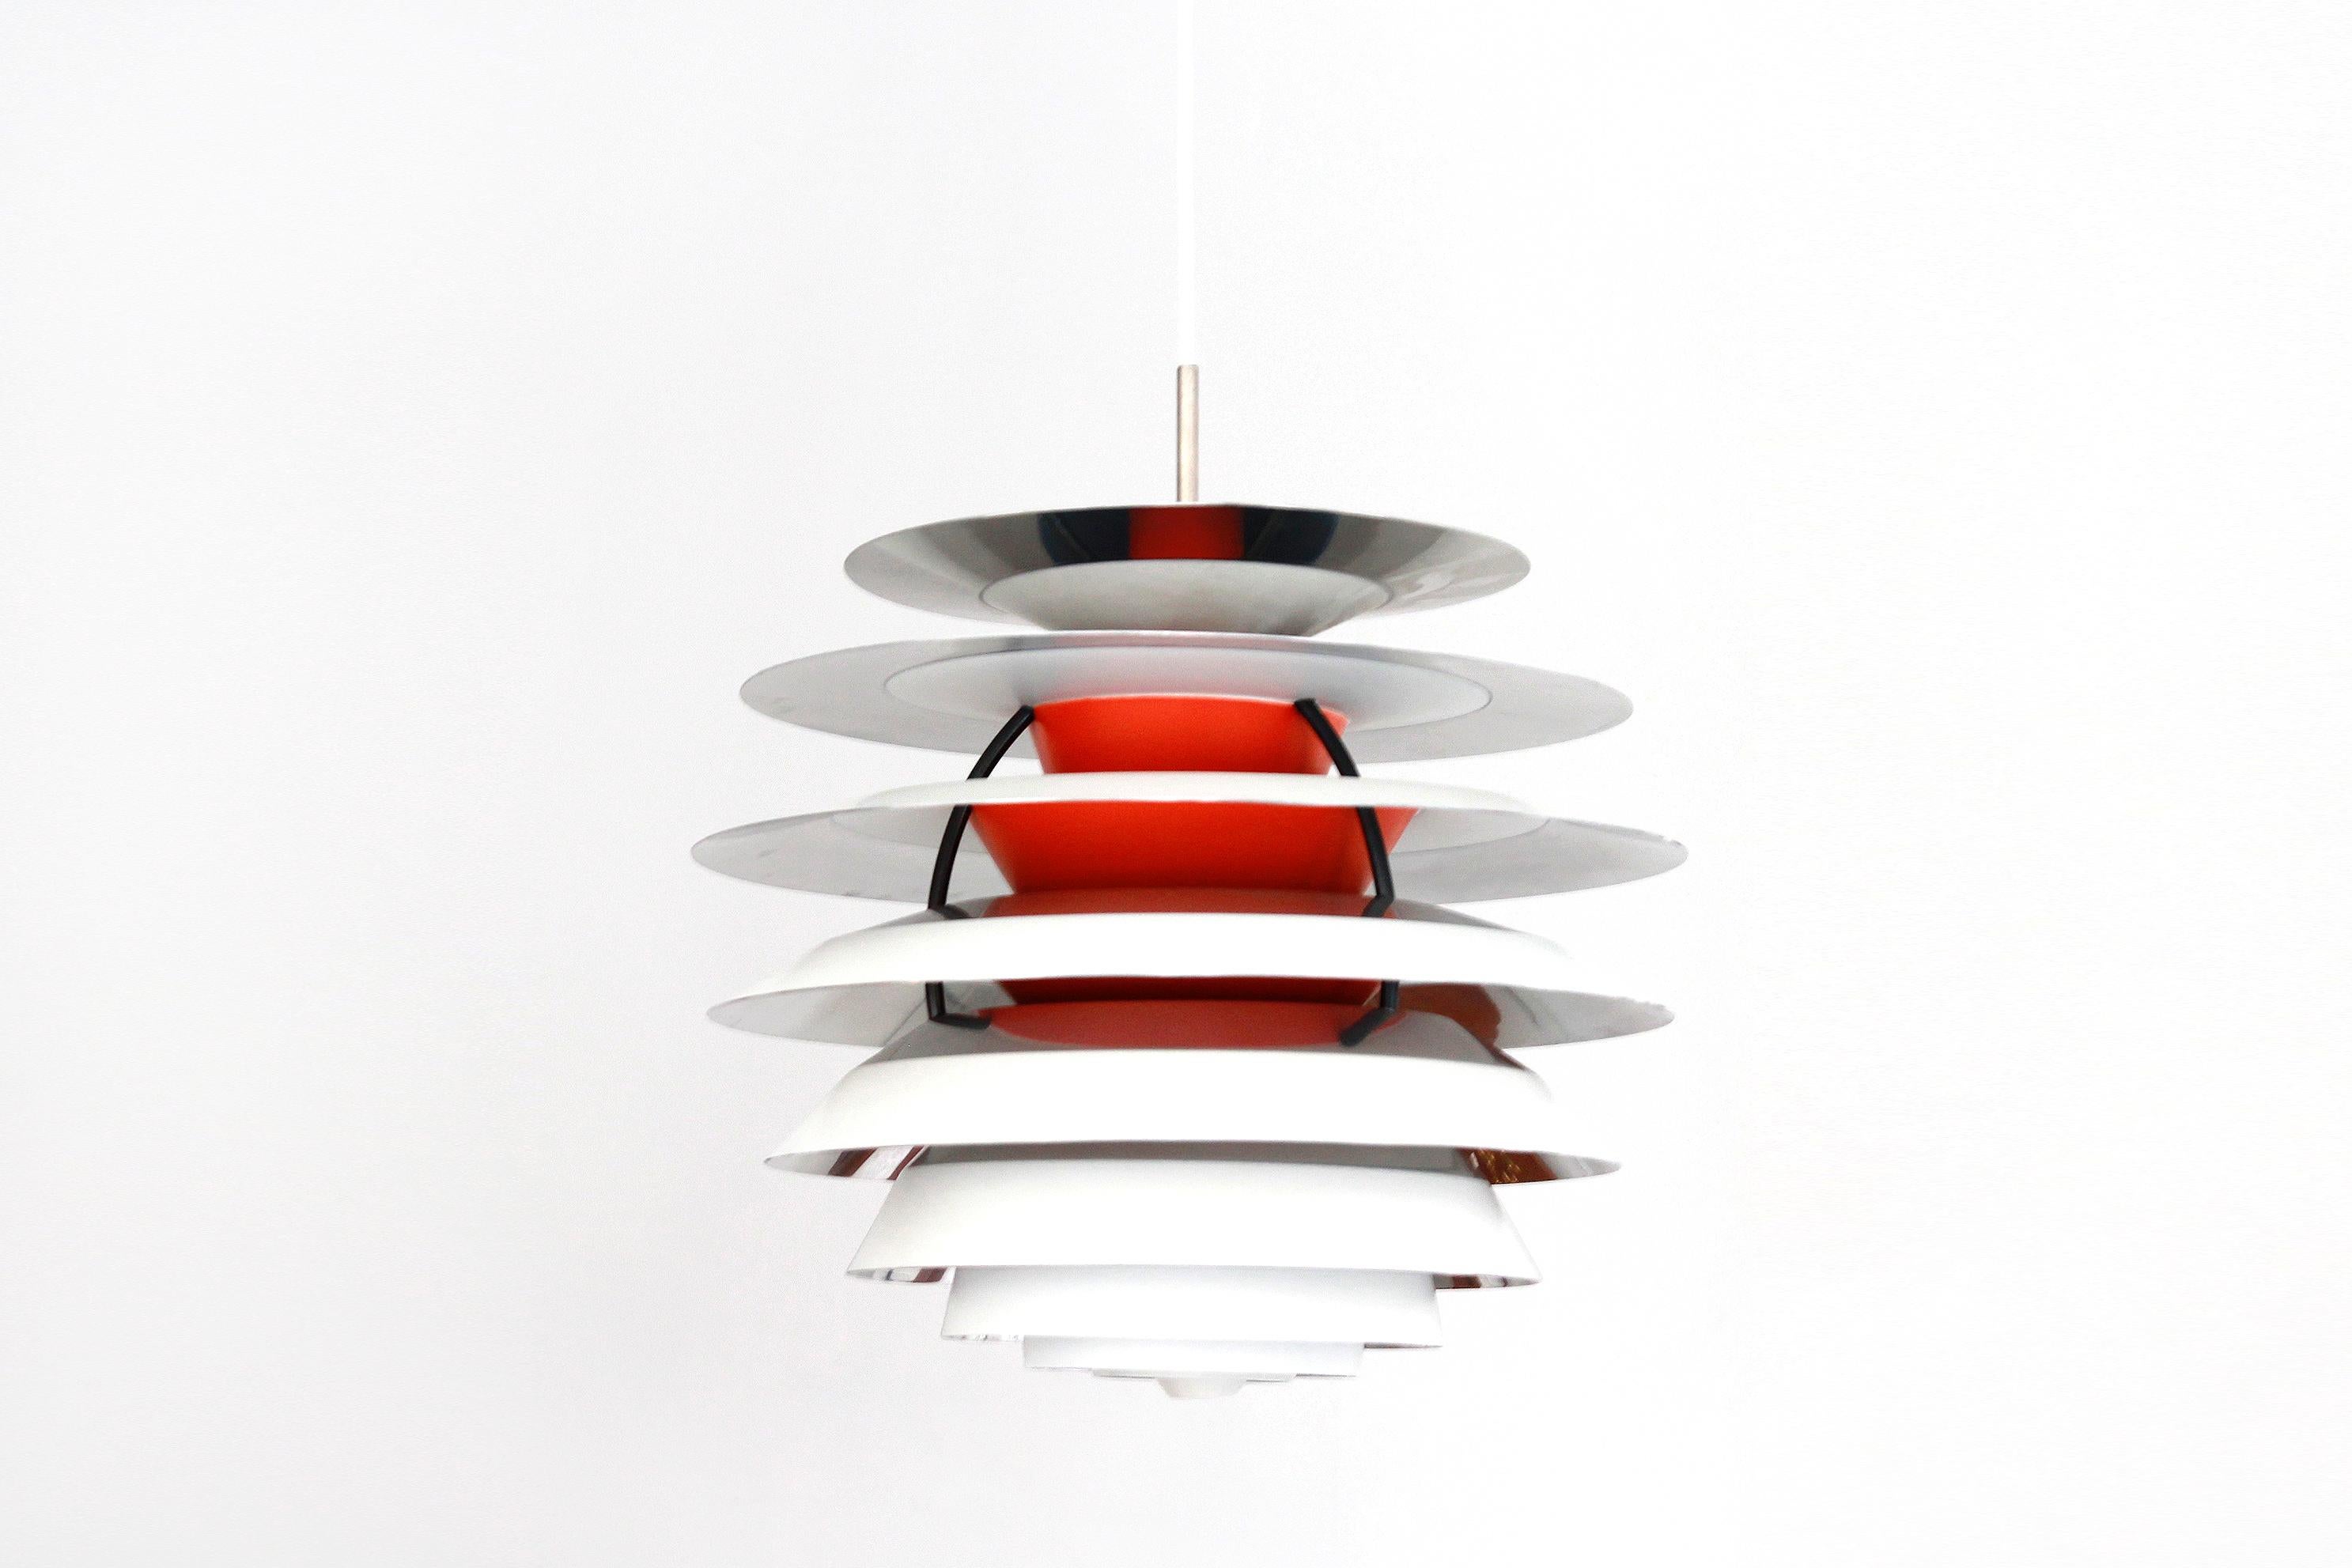 Particularly beautiful lamp designed by Poul Henningsen and produced by Danish manufacturer Louis Poulsen in the 1960's. This lamp called 'Kontrast' is a masterpiece from the oevre of the Danish light architect. The hanging lamp is made of white and